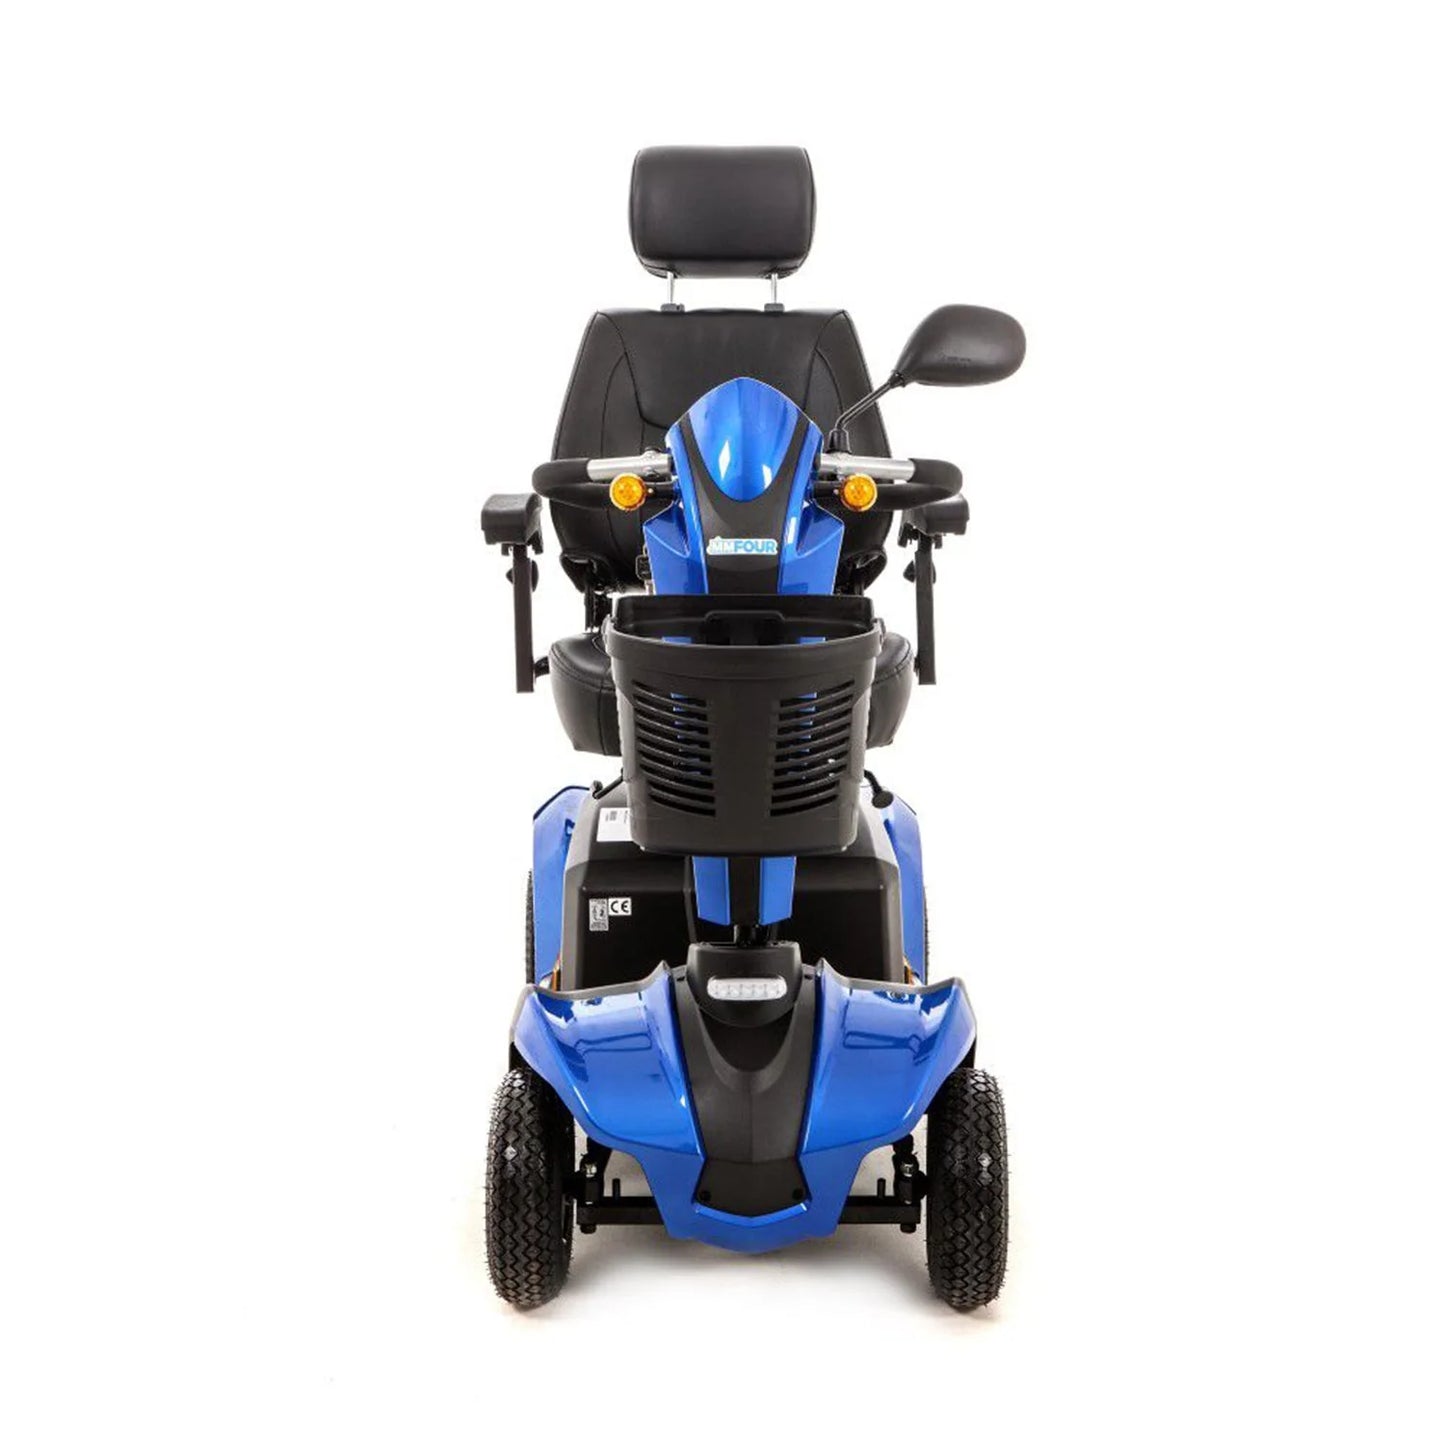 Monarch MM4 Mobility Scooter - mobilitybritain.com